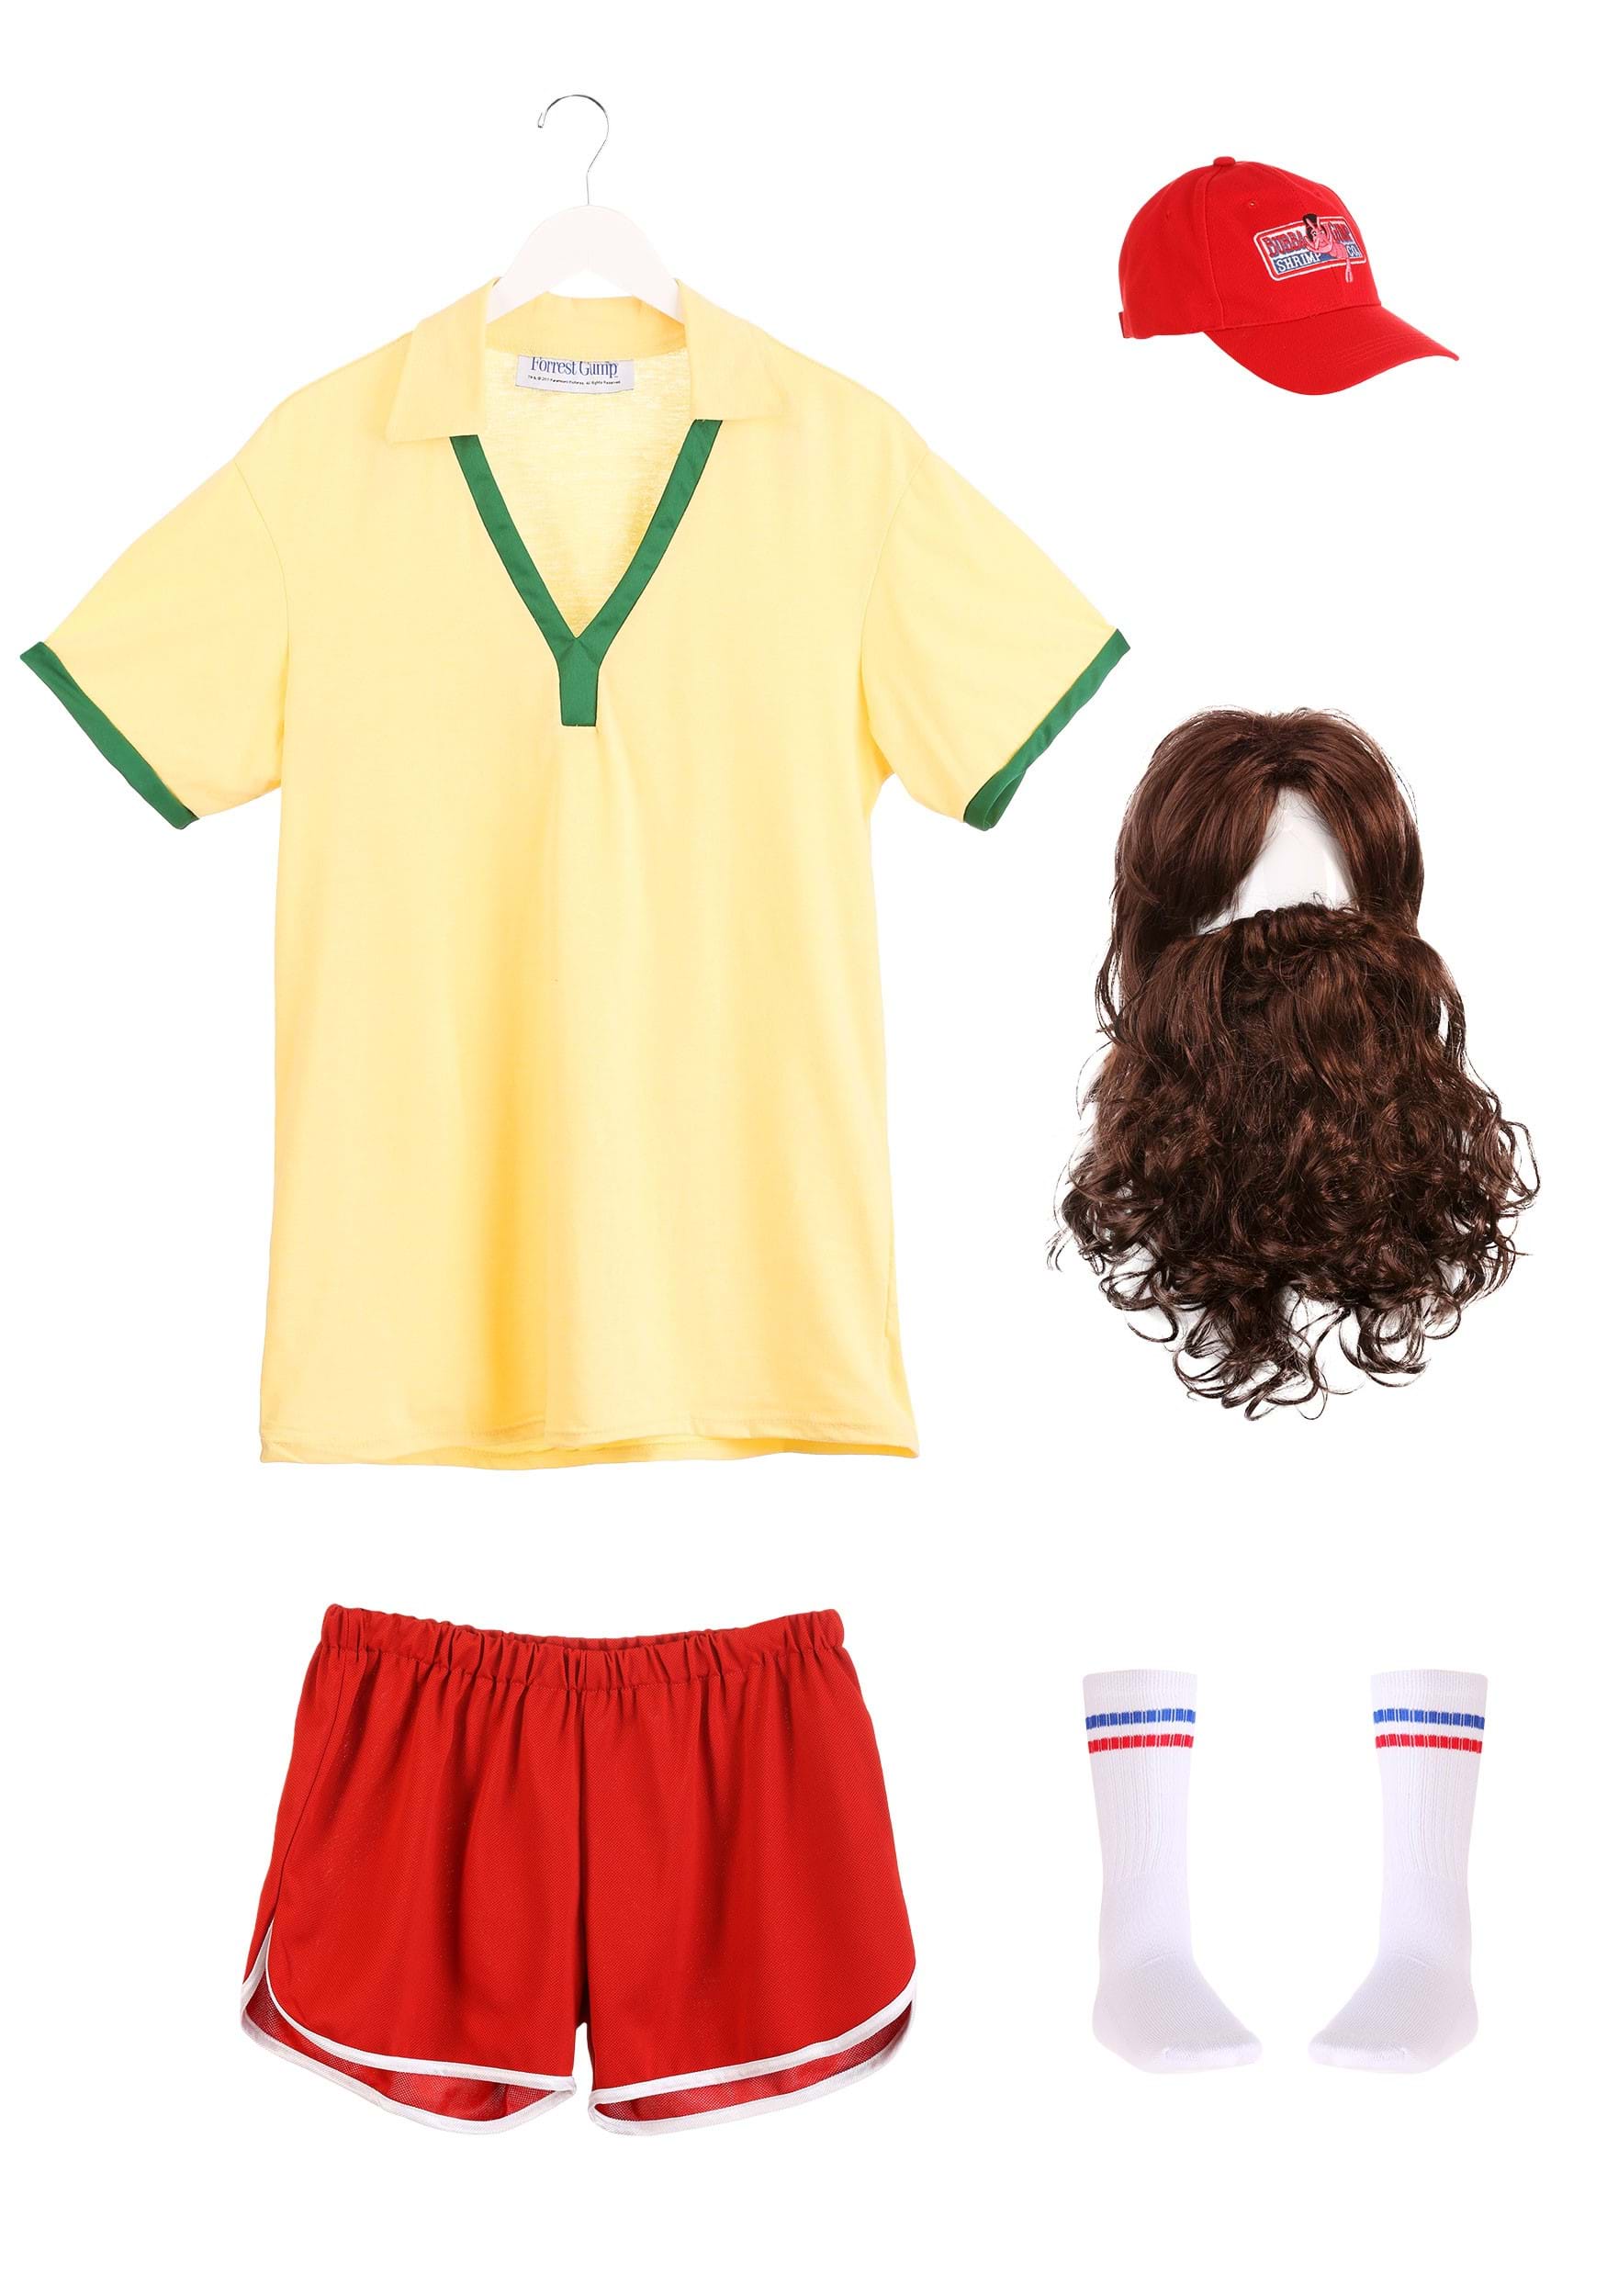 jenny from forrest gump hippie costume